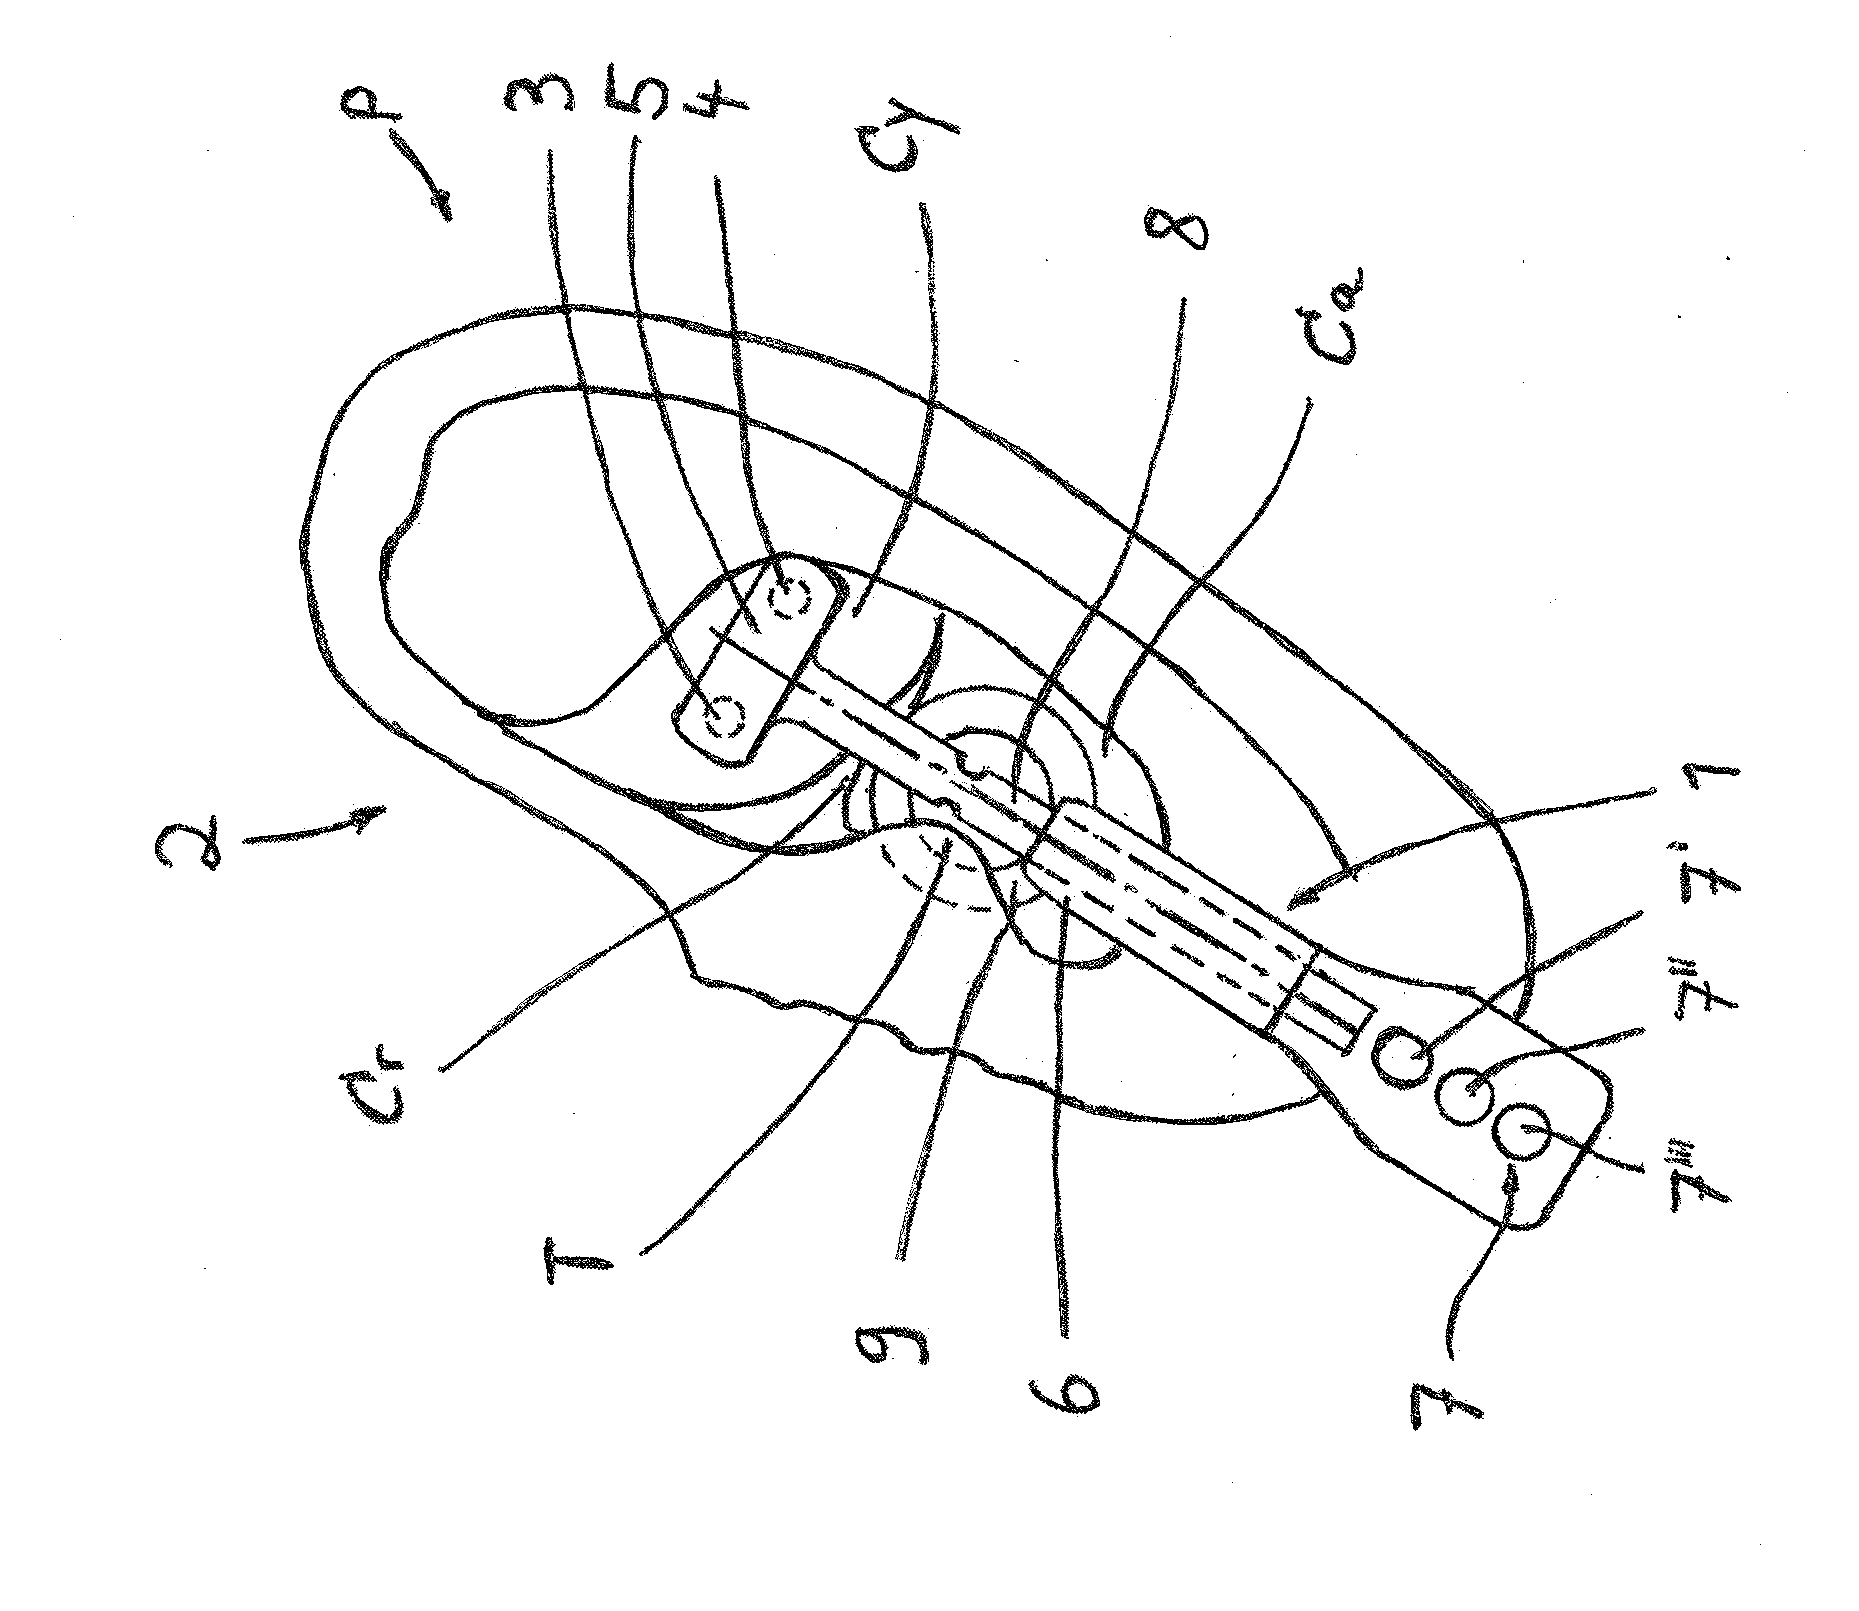 Device for the application of a transcutaneous electrical stimulation stimulus